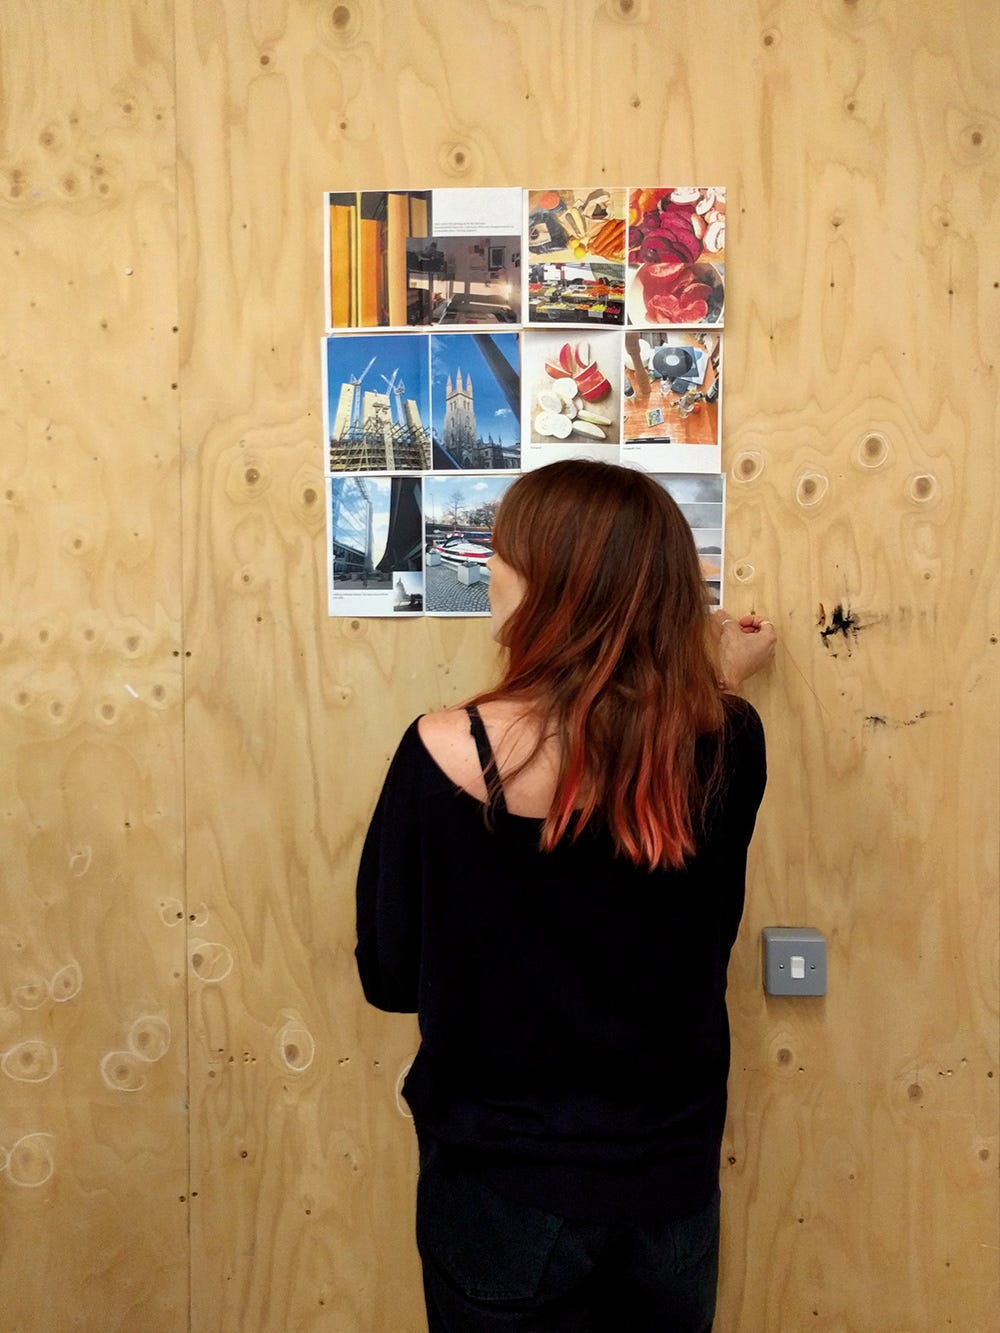 A woman standing in front of a wooden office wall looking at printed photographs of public infrastructure